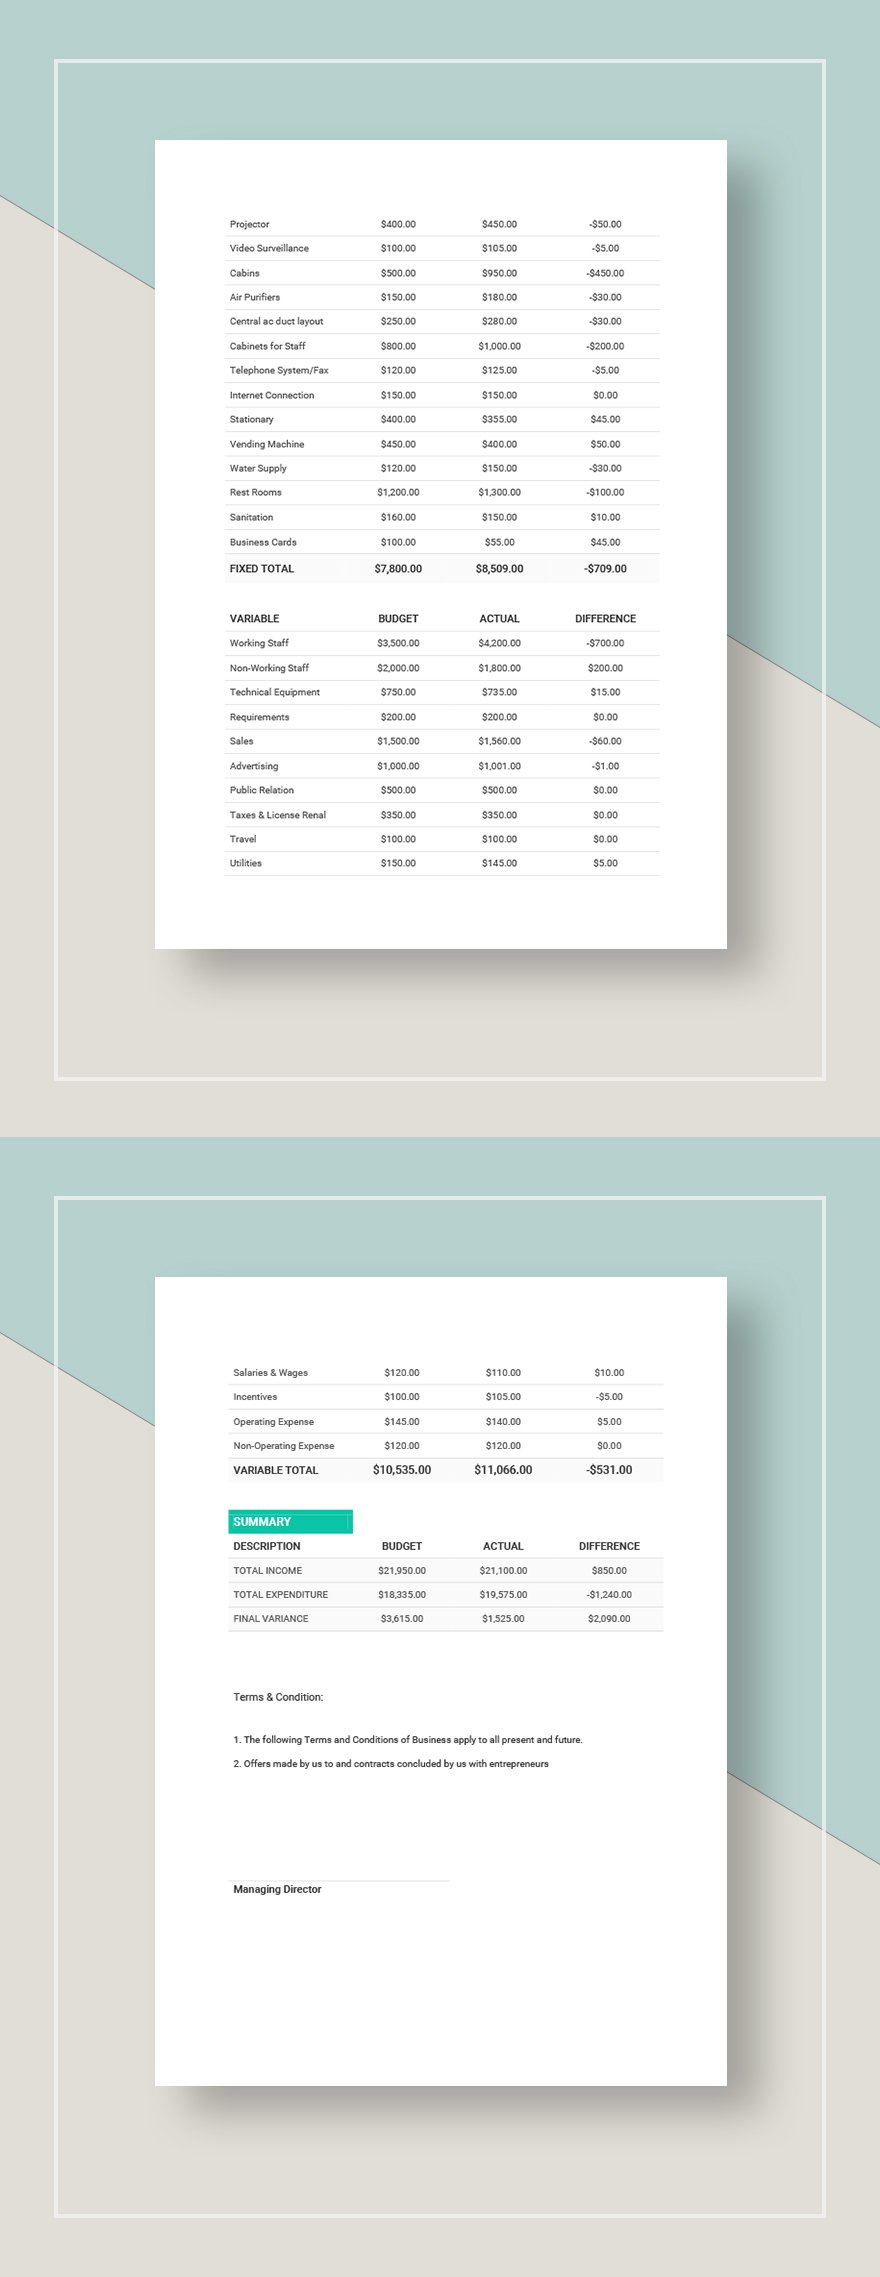 Startup Business Budget Template